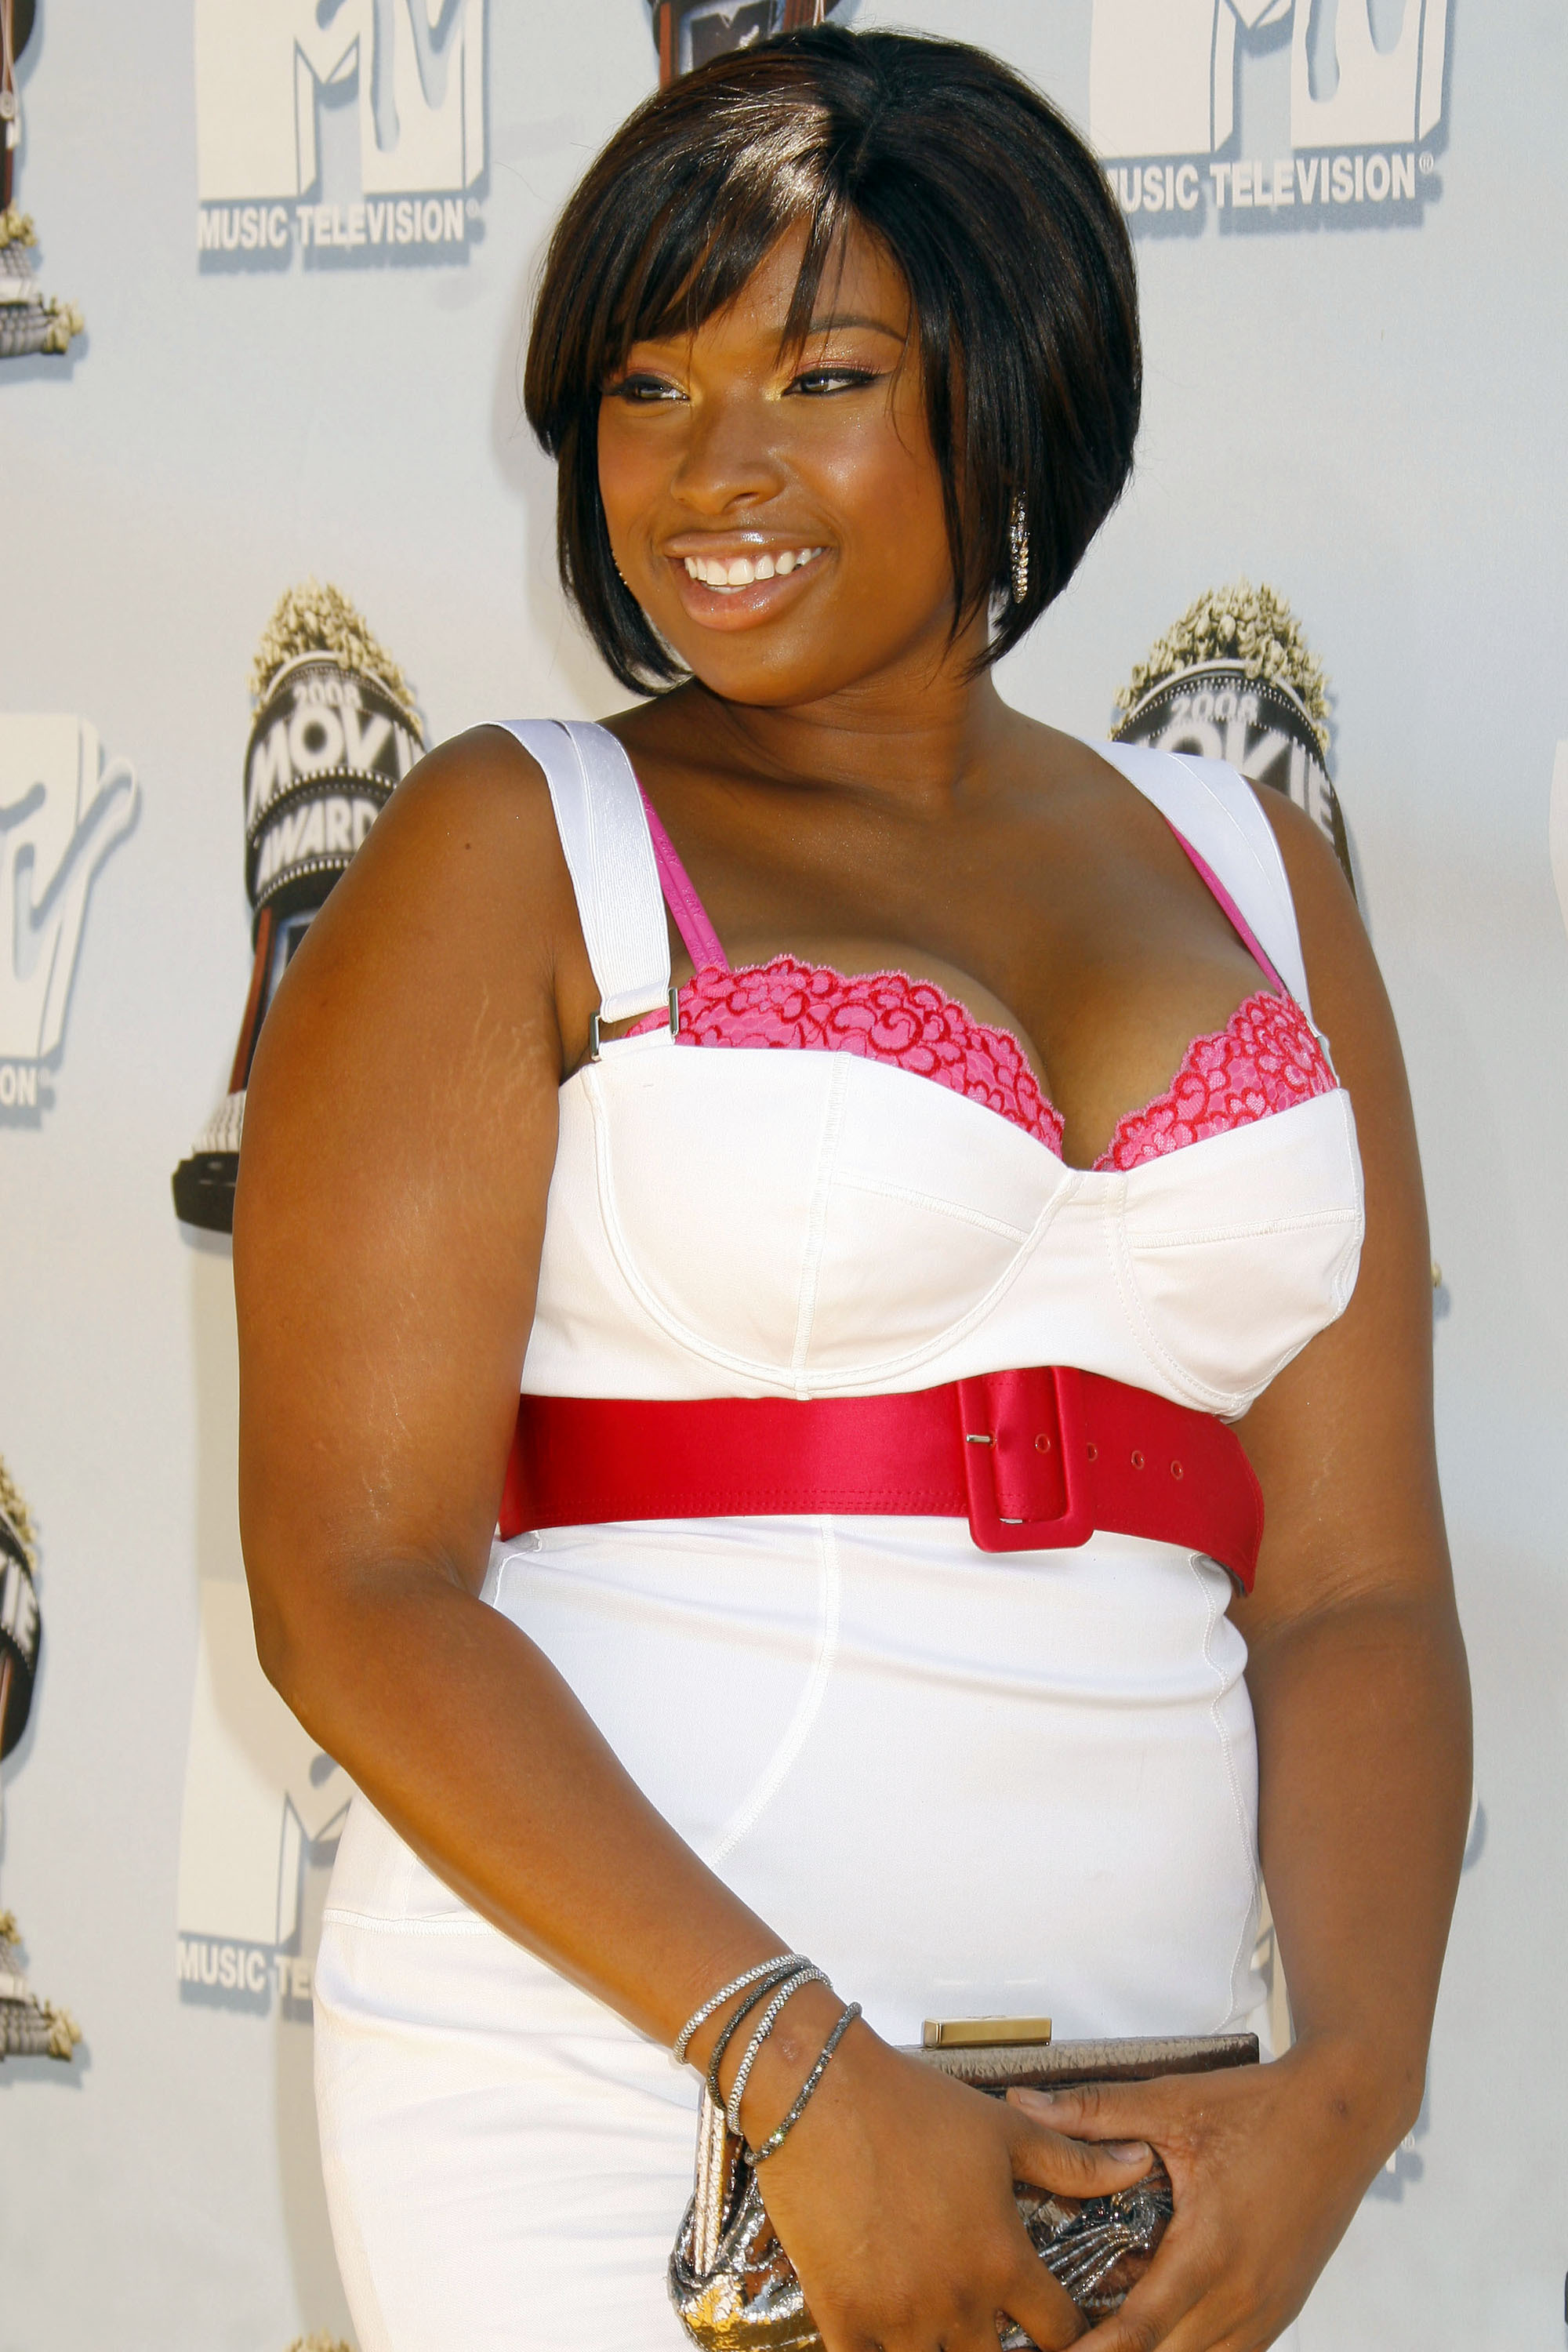 Number of votes: 1. There are 275 more pics in the Jennifer Hudson photo ga...